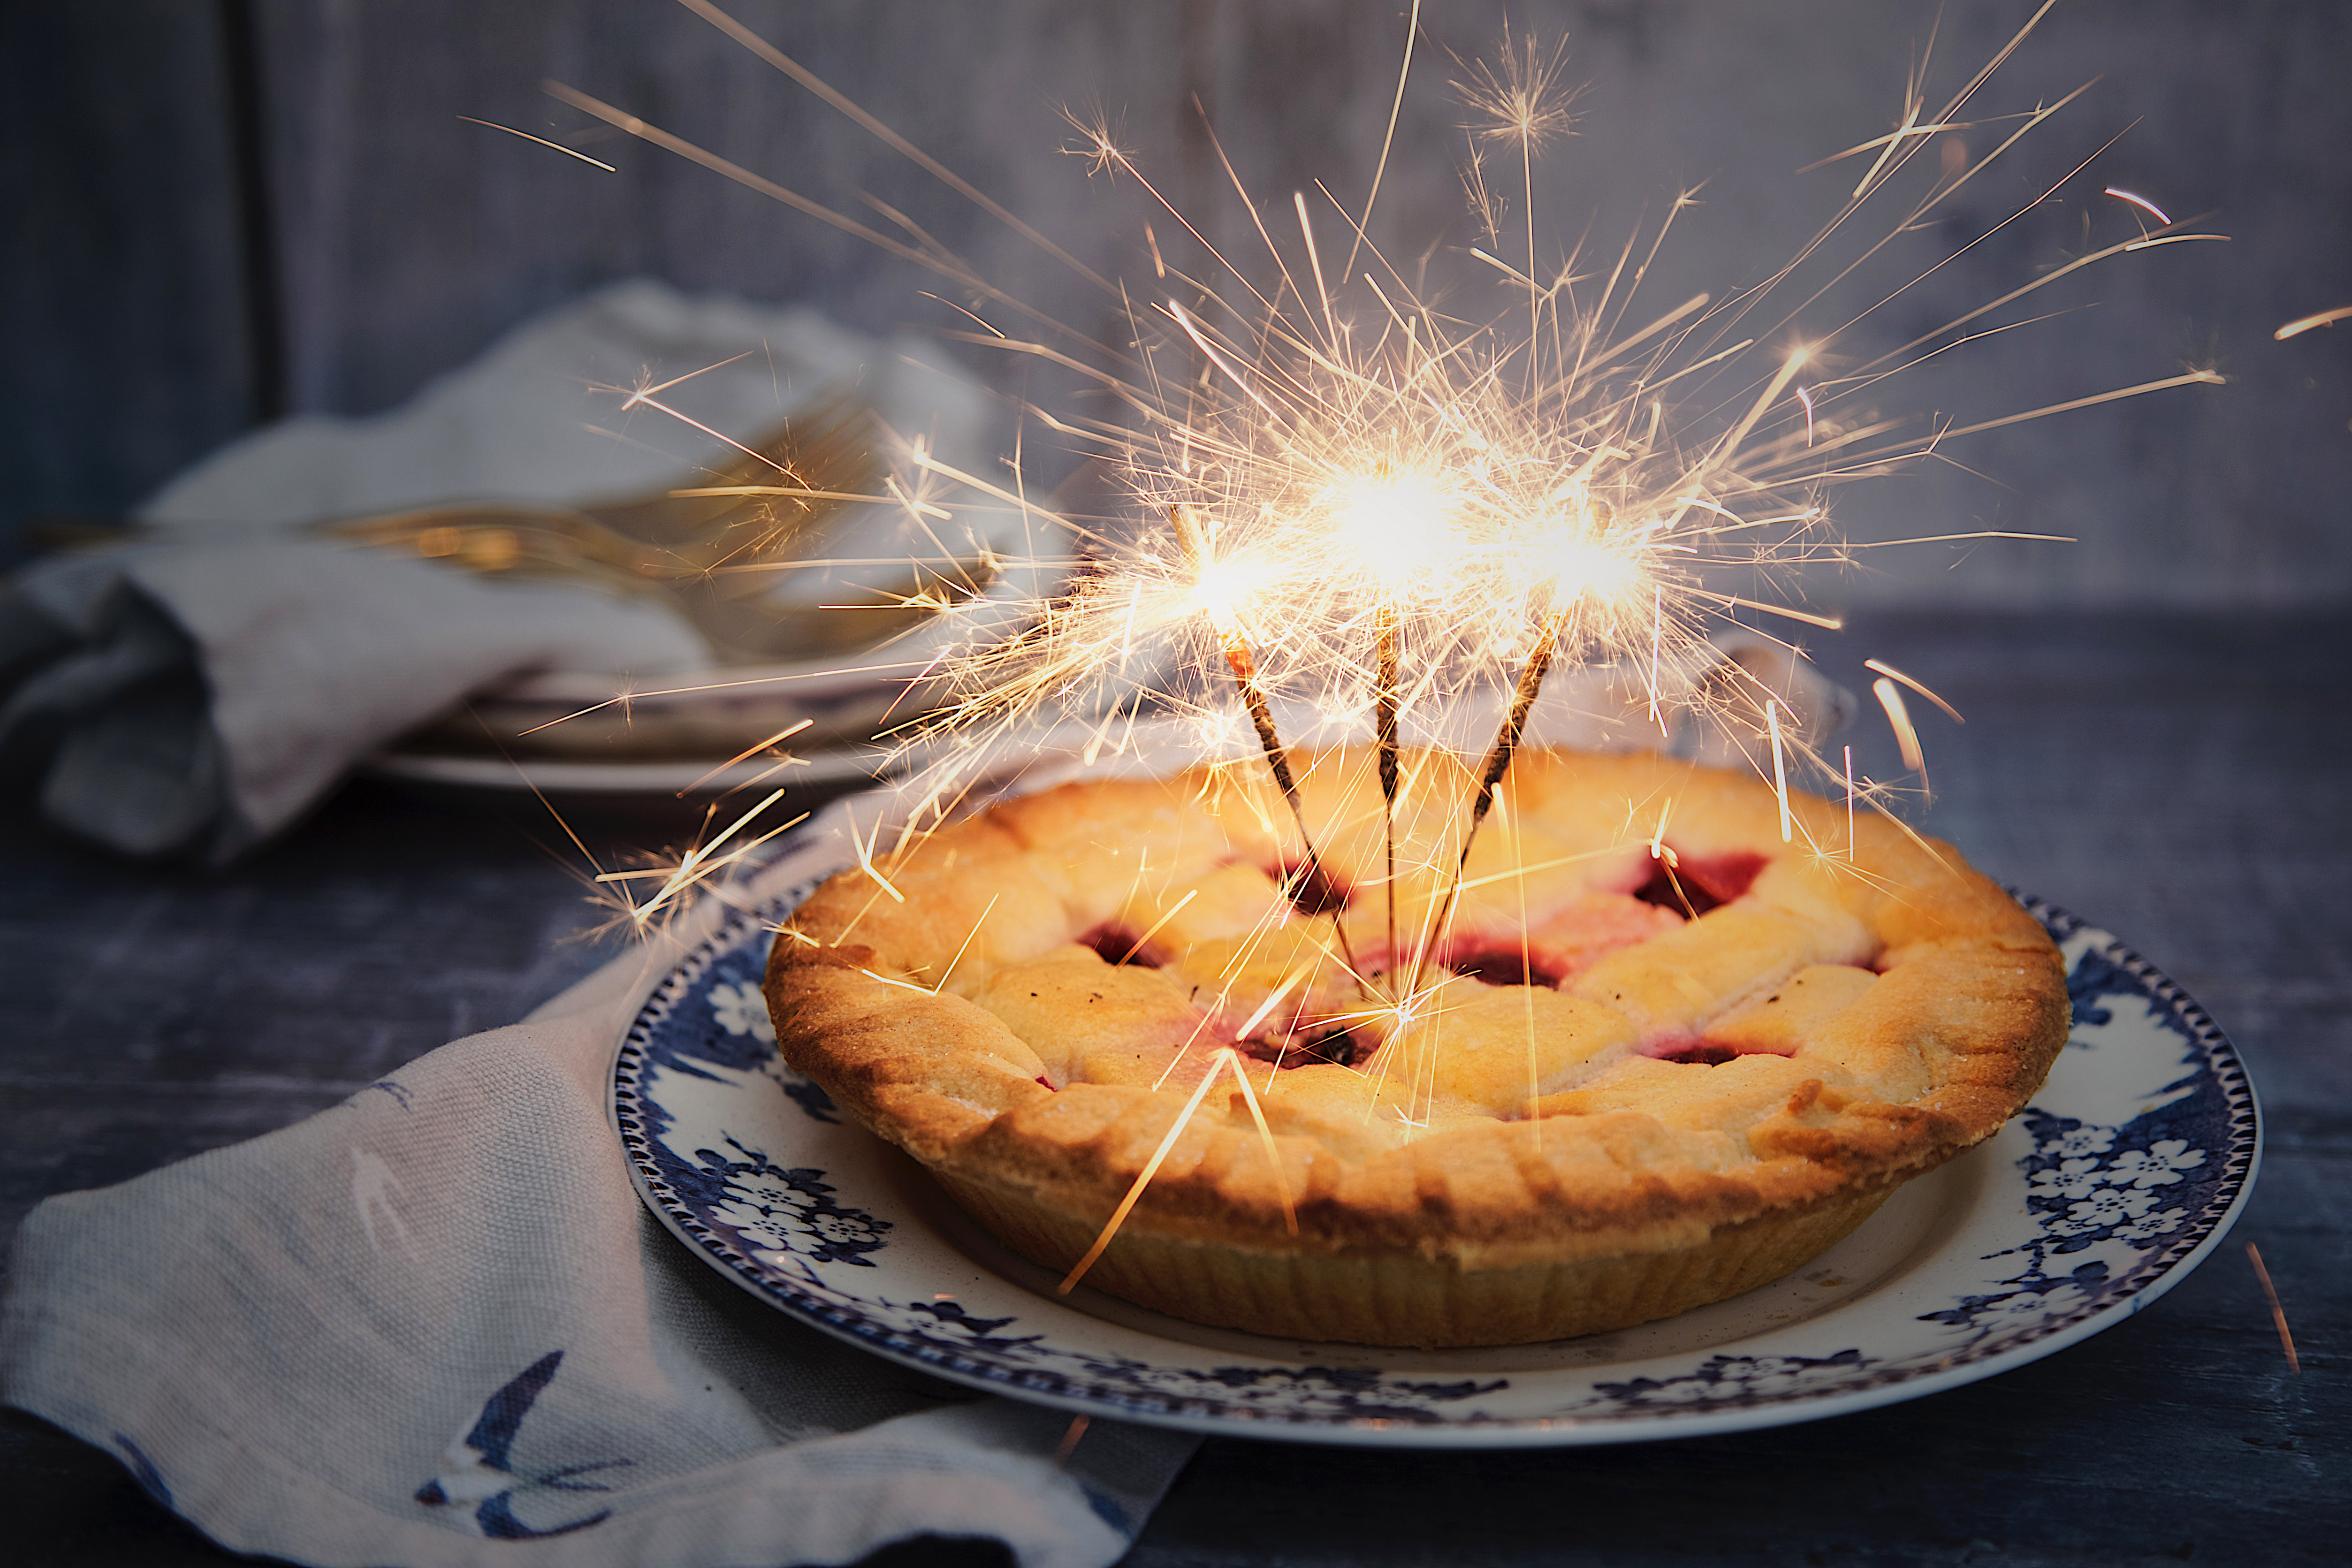 Birthday Pie with three sparklers as Candles image - Free stock photo - Public Domain photo - CC0 Images